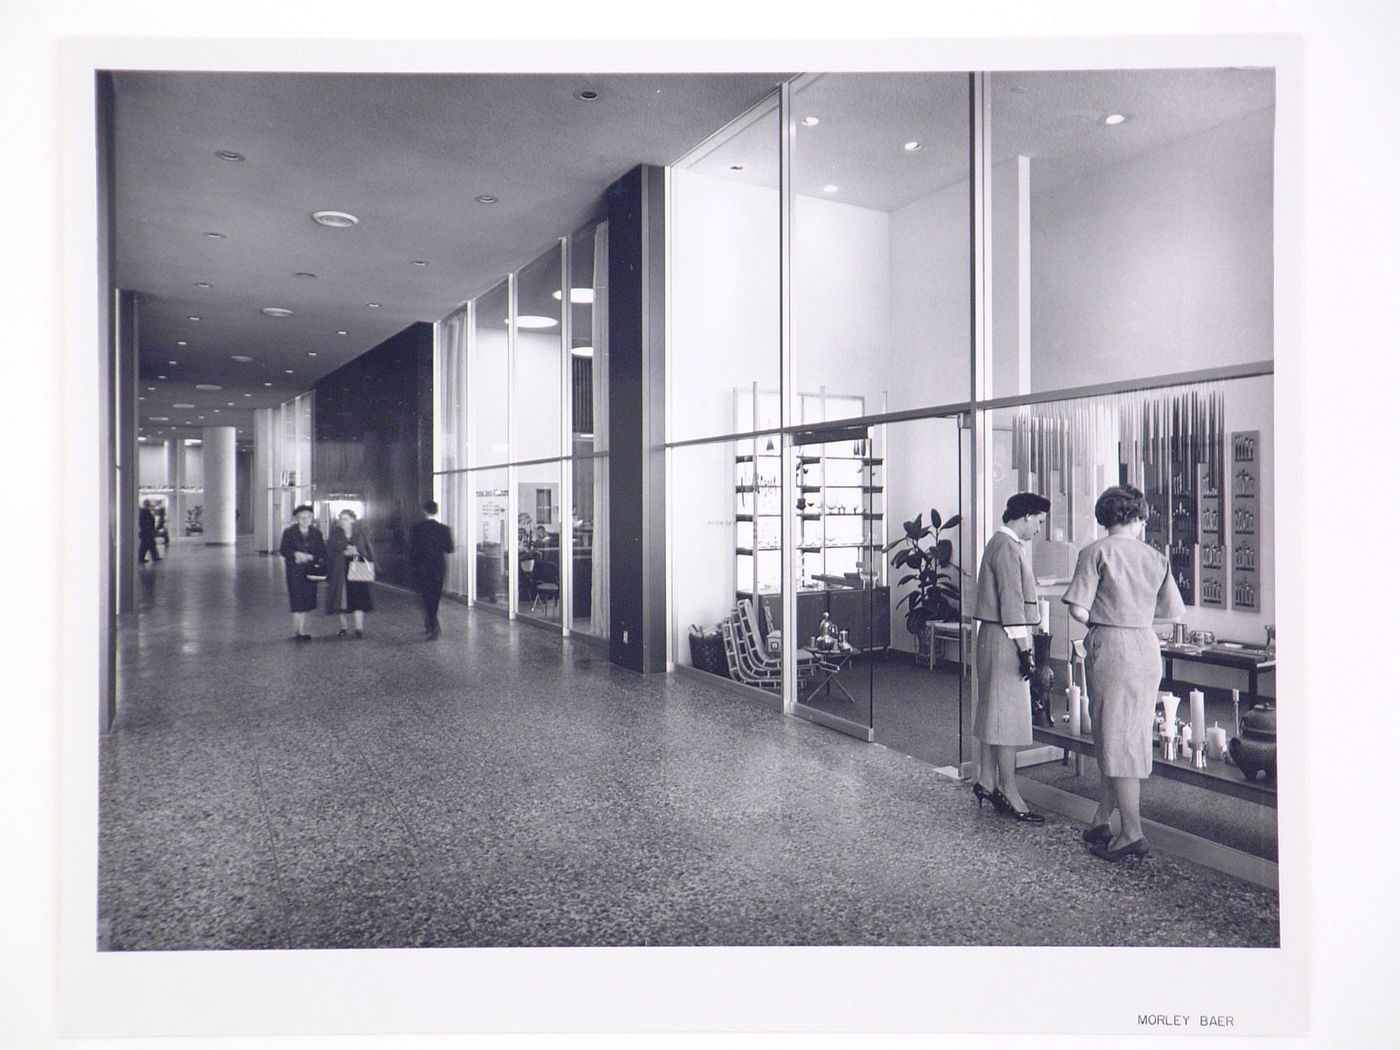 Interior view of the Kaiser Center office building showing a corridor, a store, an office and people, Oakland, California